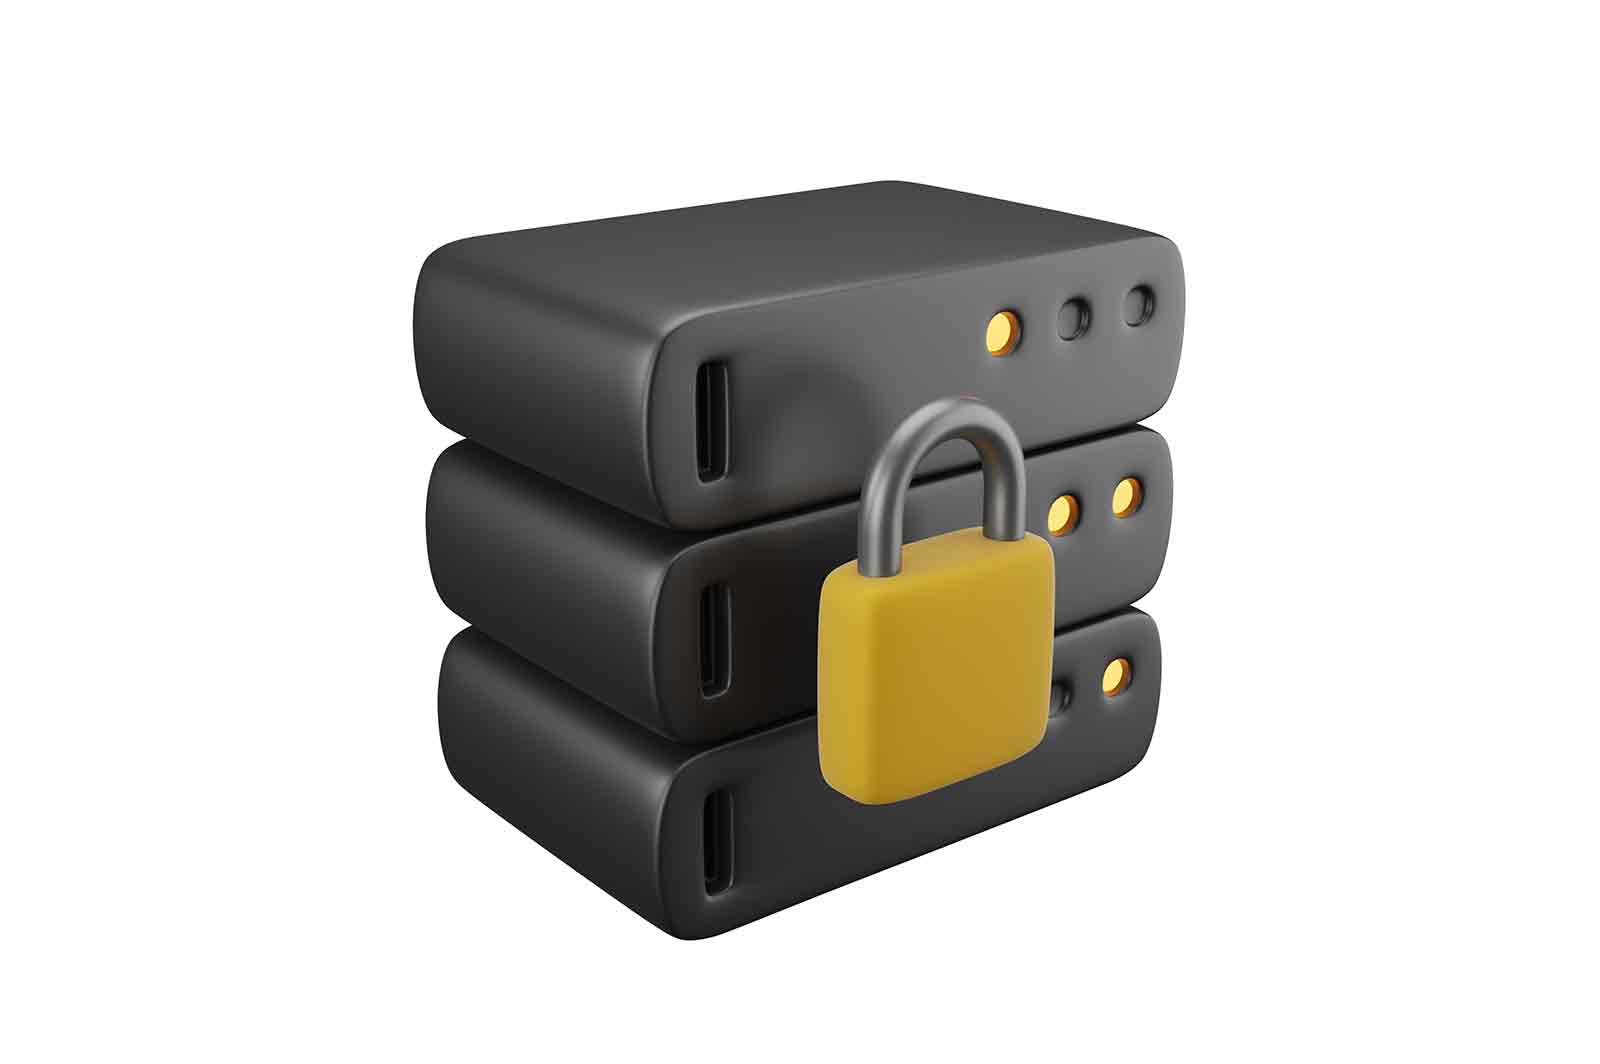 Database server with closed padlock icon, virtual private network 3d rendered illustration. Vpn, internet security, cyberspace protection 3d isometric